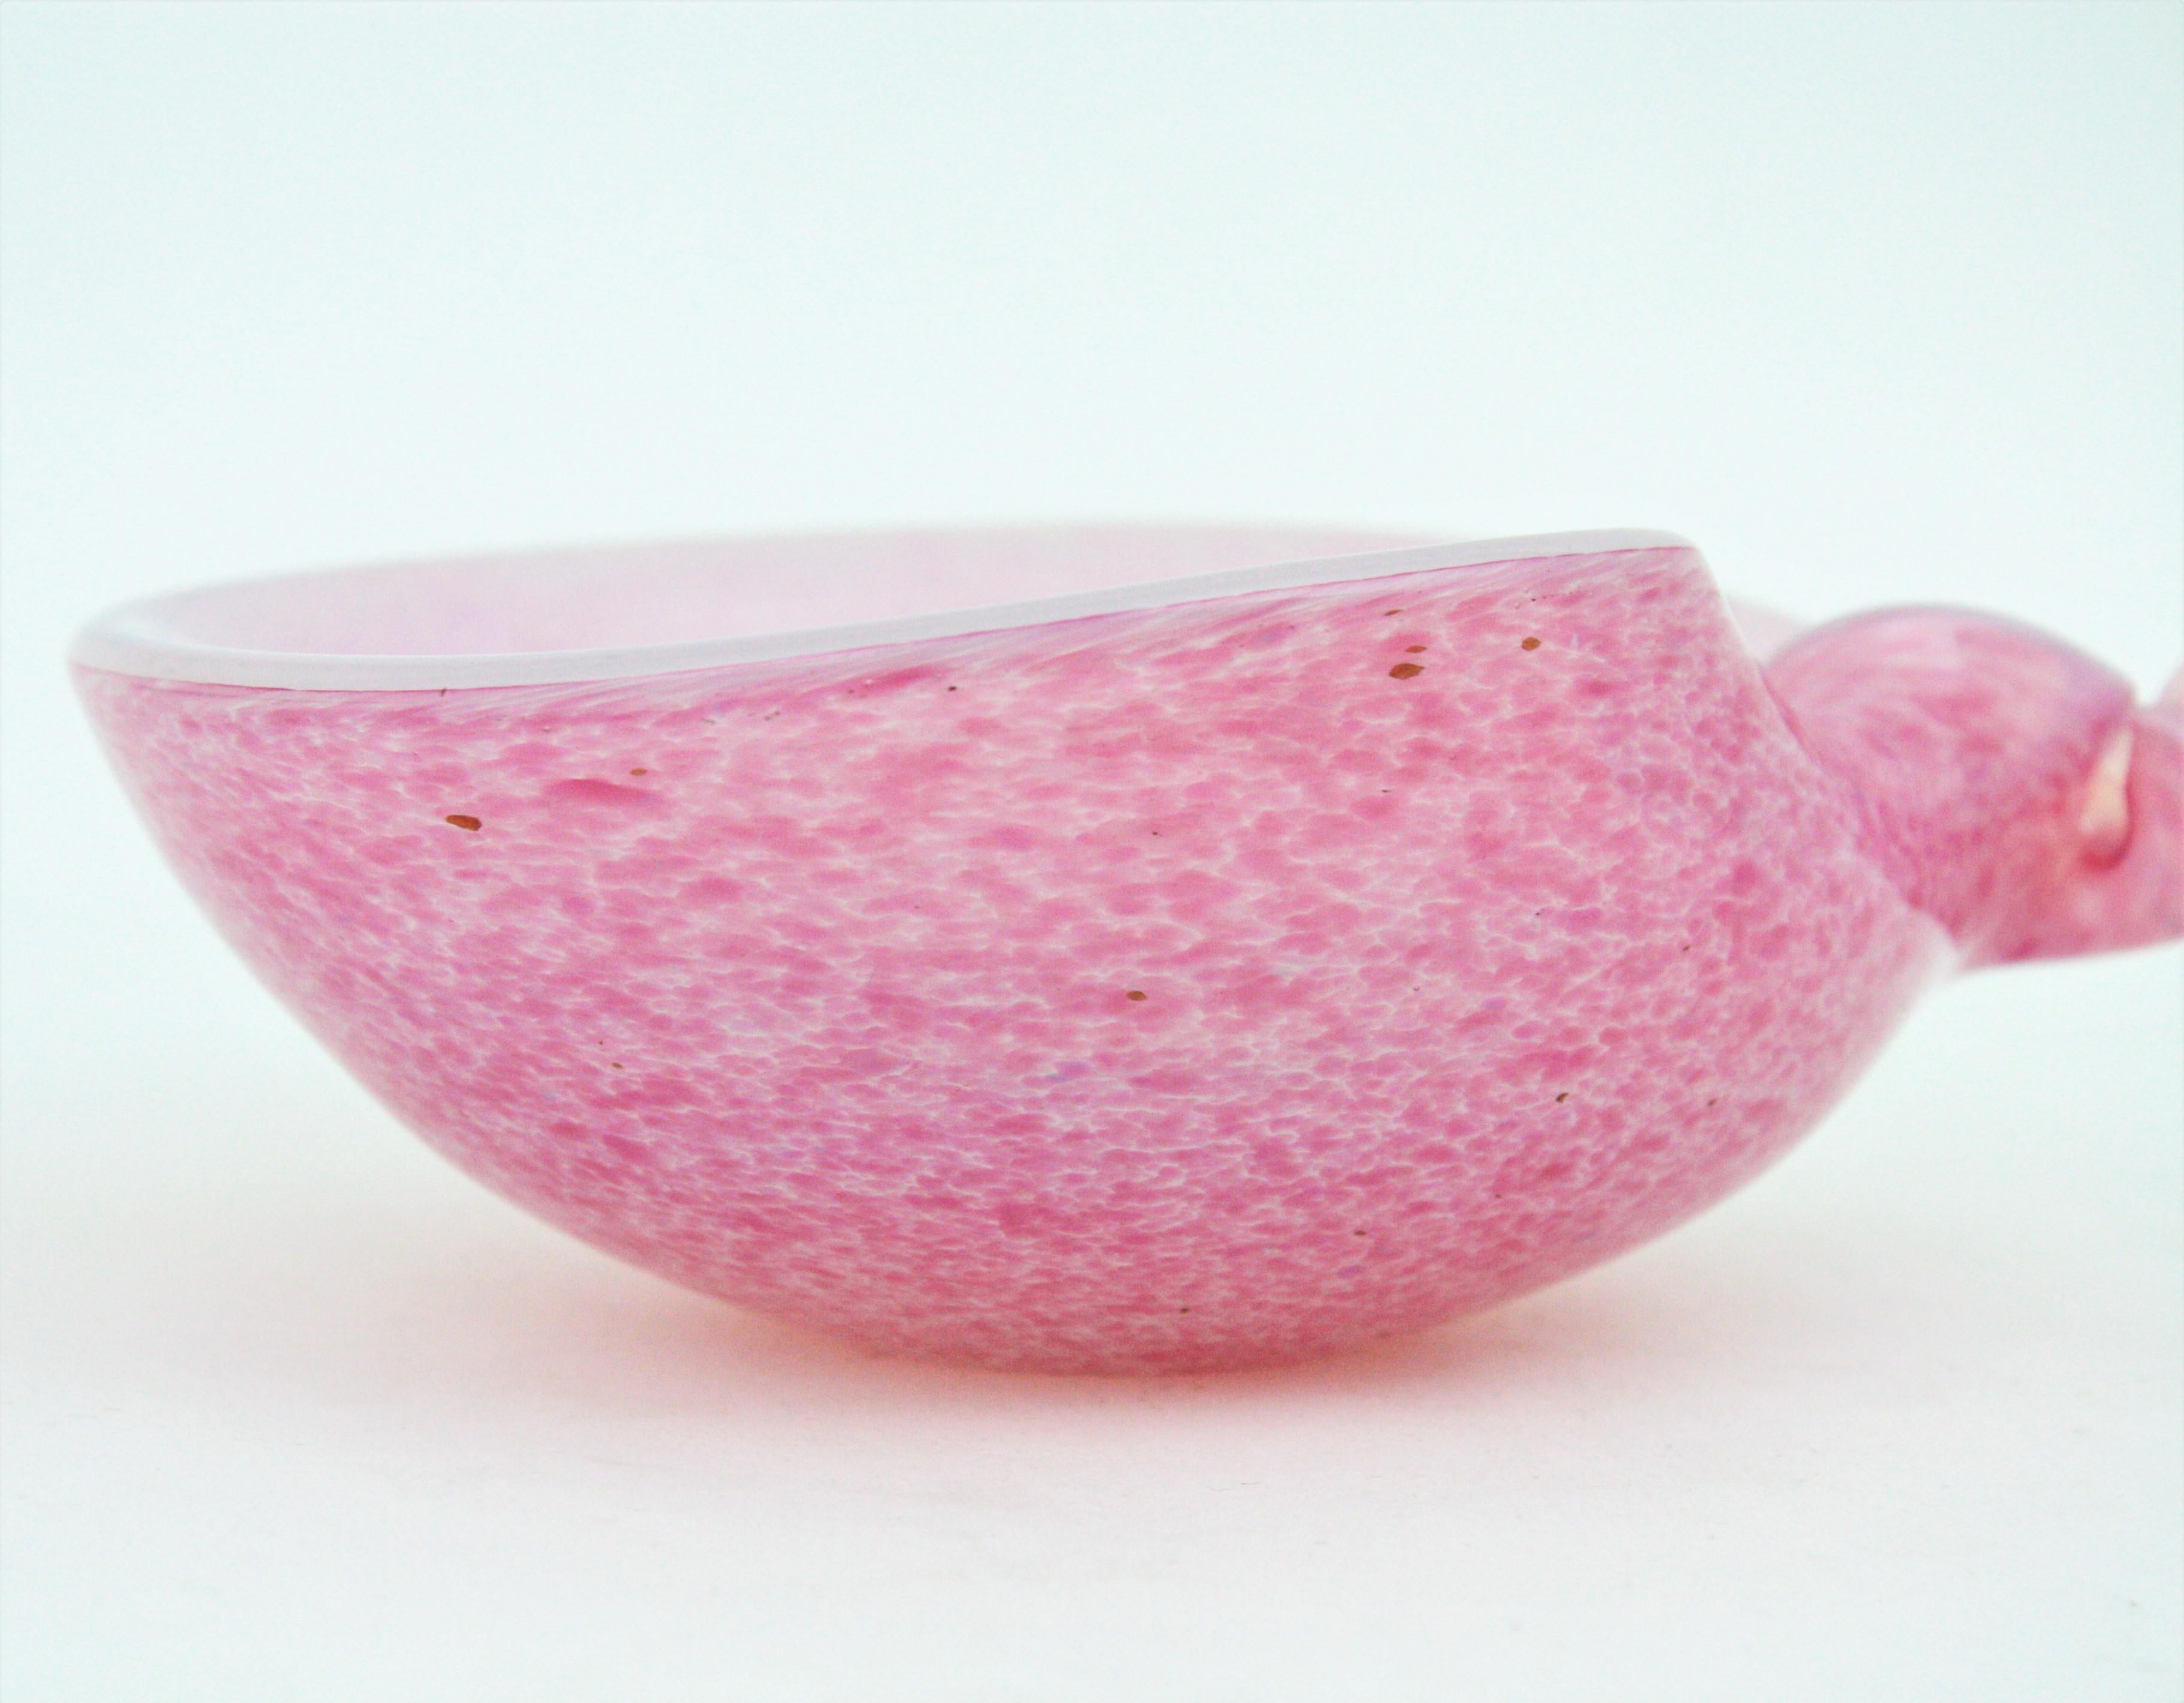 Archimede Seguso Murano Glass Opalescent Pink White Sea Shell Bowl, Italy, 1960s For Sale 5